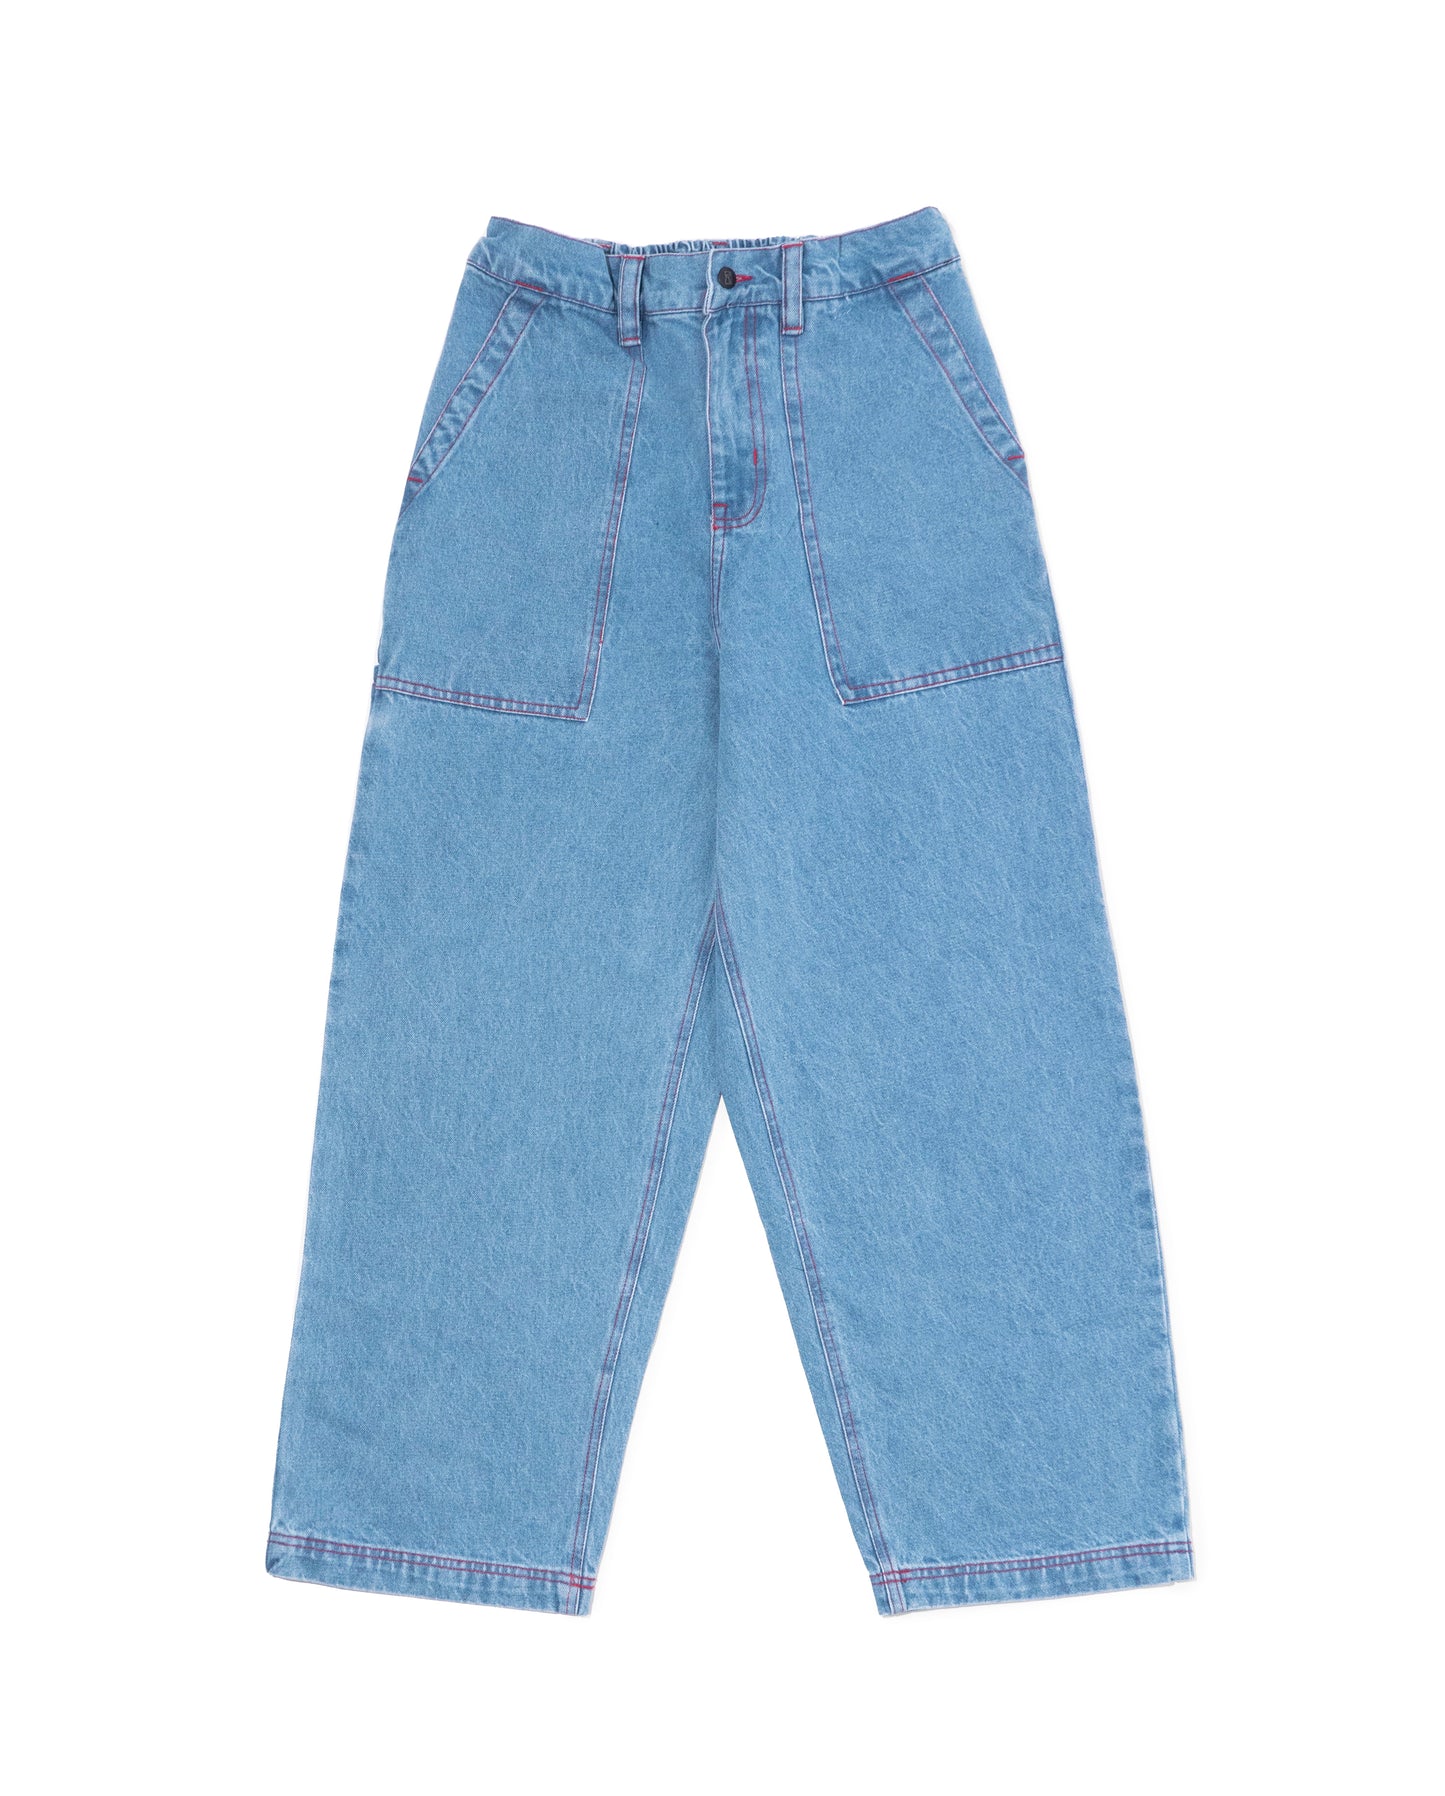 Painter pant - light blue denim w. red stitiching – POETICCOLLECTIVE